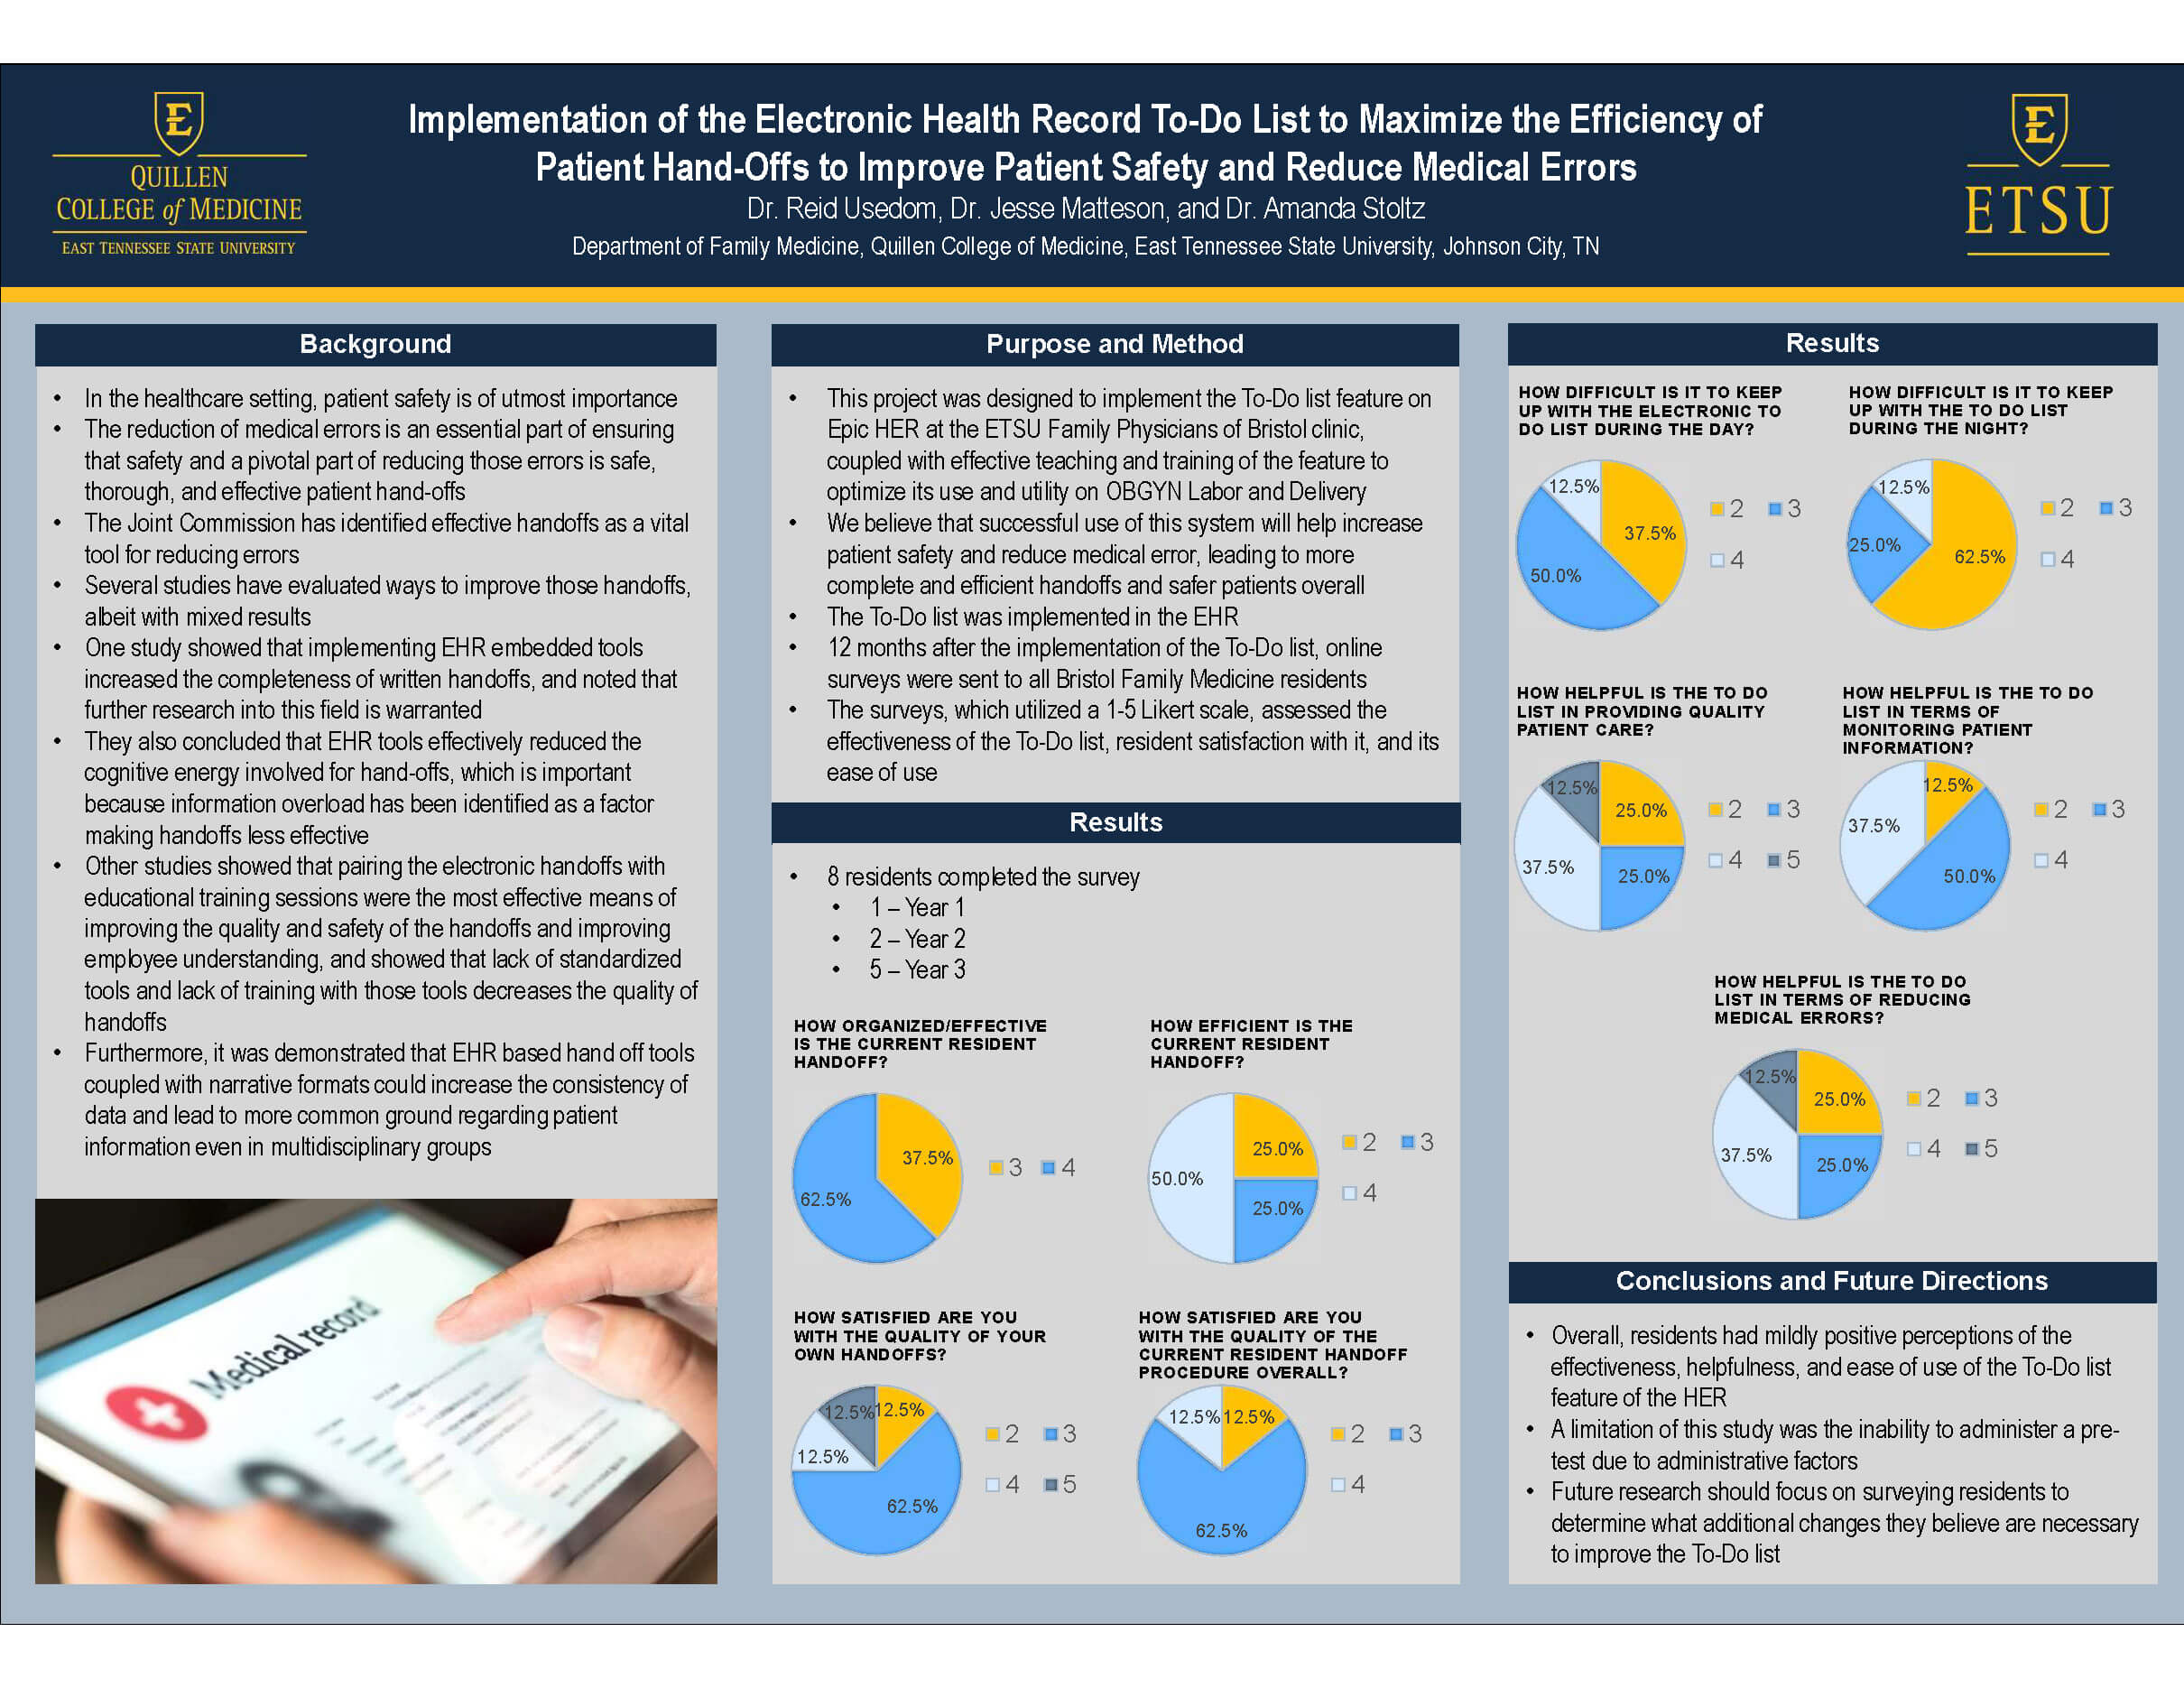 Implementation of the Electronic Health Record To-Do List to Maximize the Efficiency of Patient Hand-Offs to Improve Patient Safety and Reduce Medical Errors